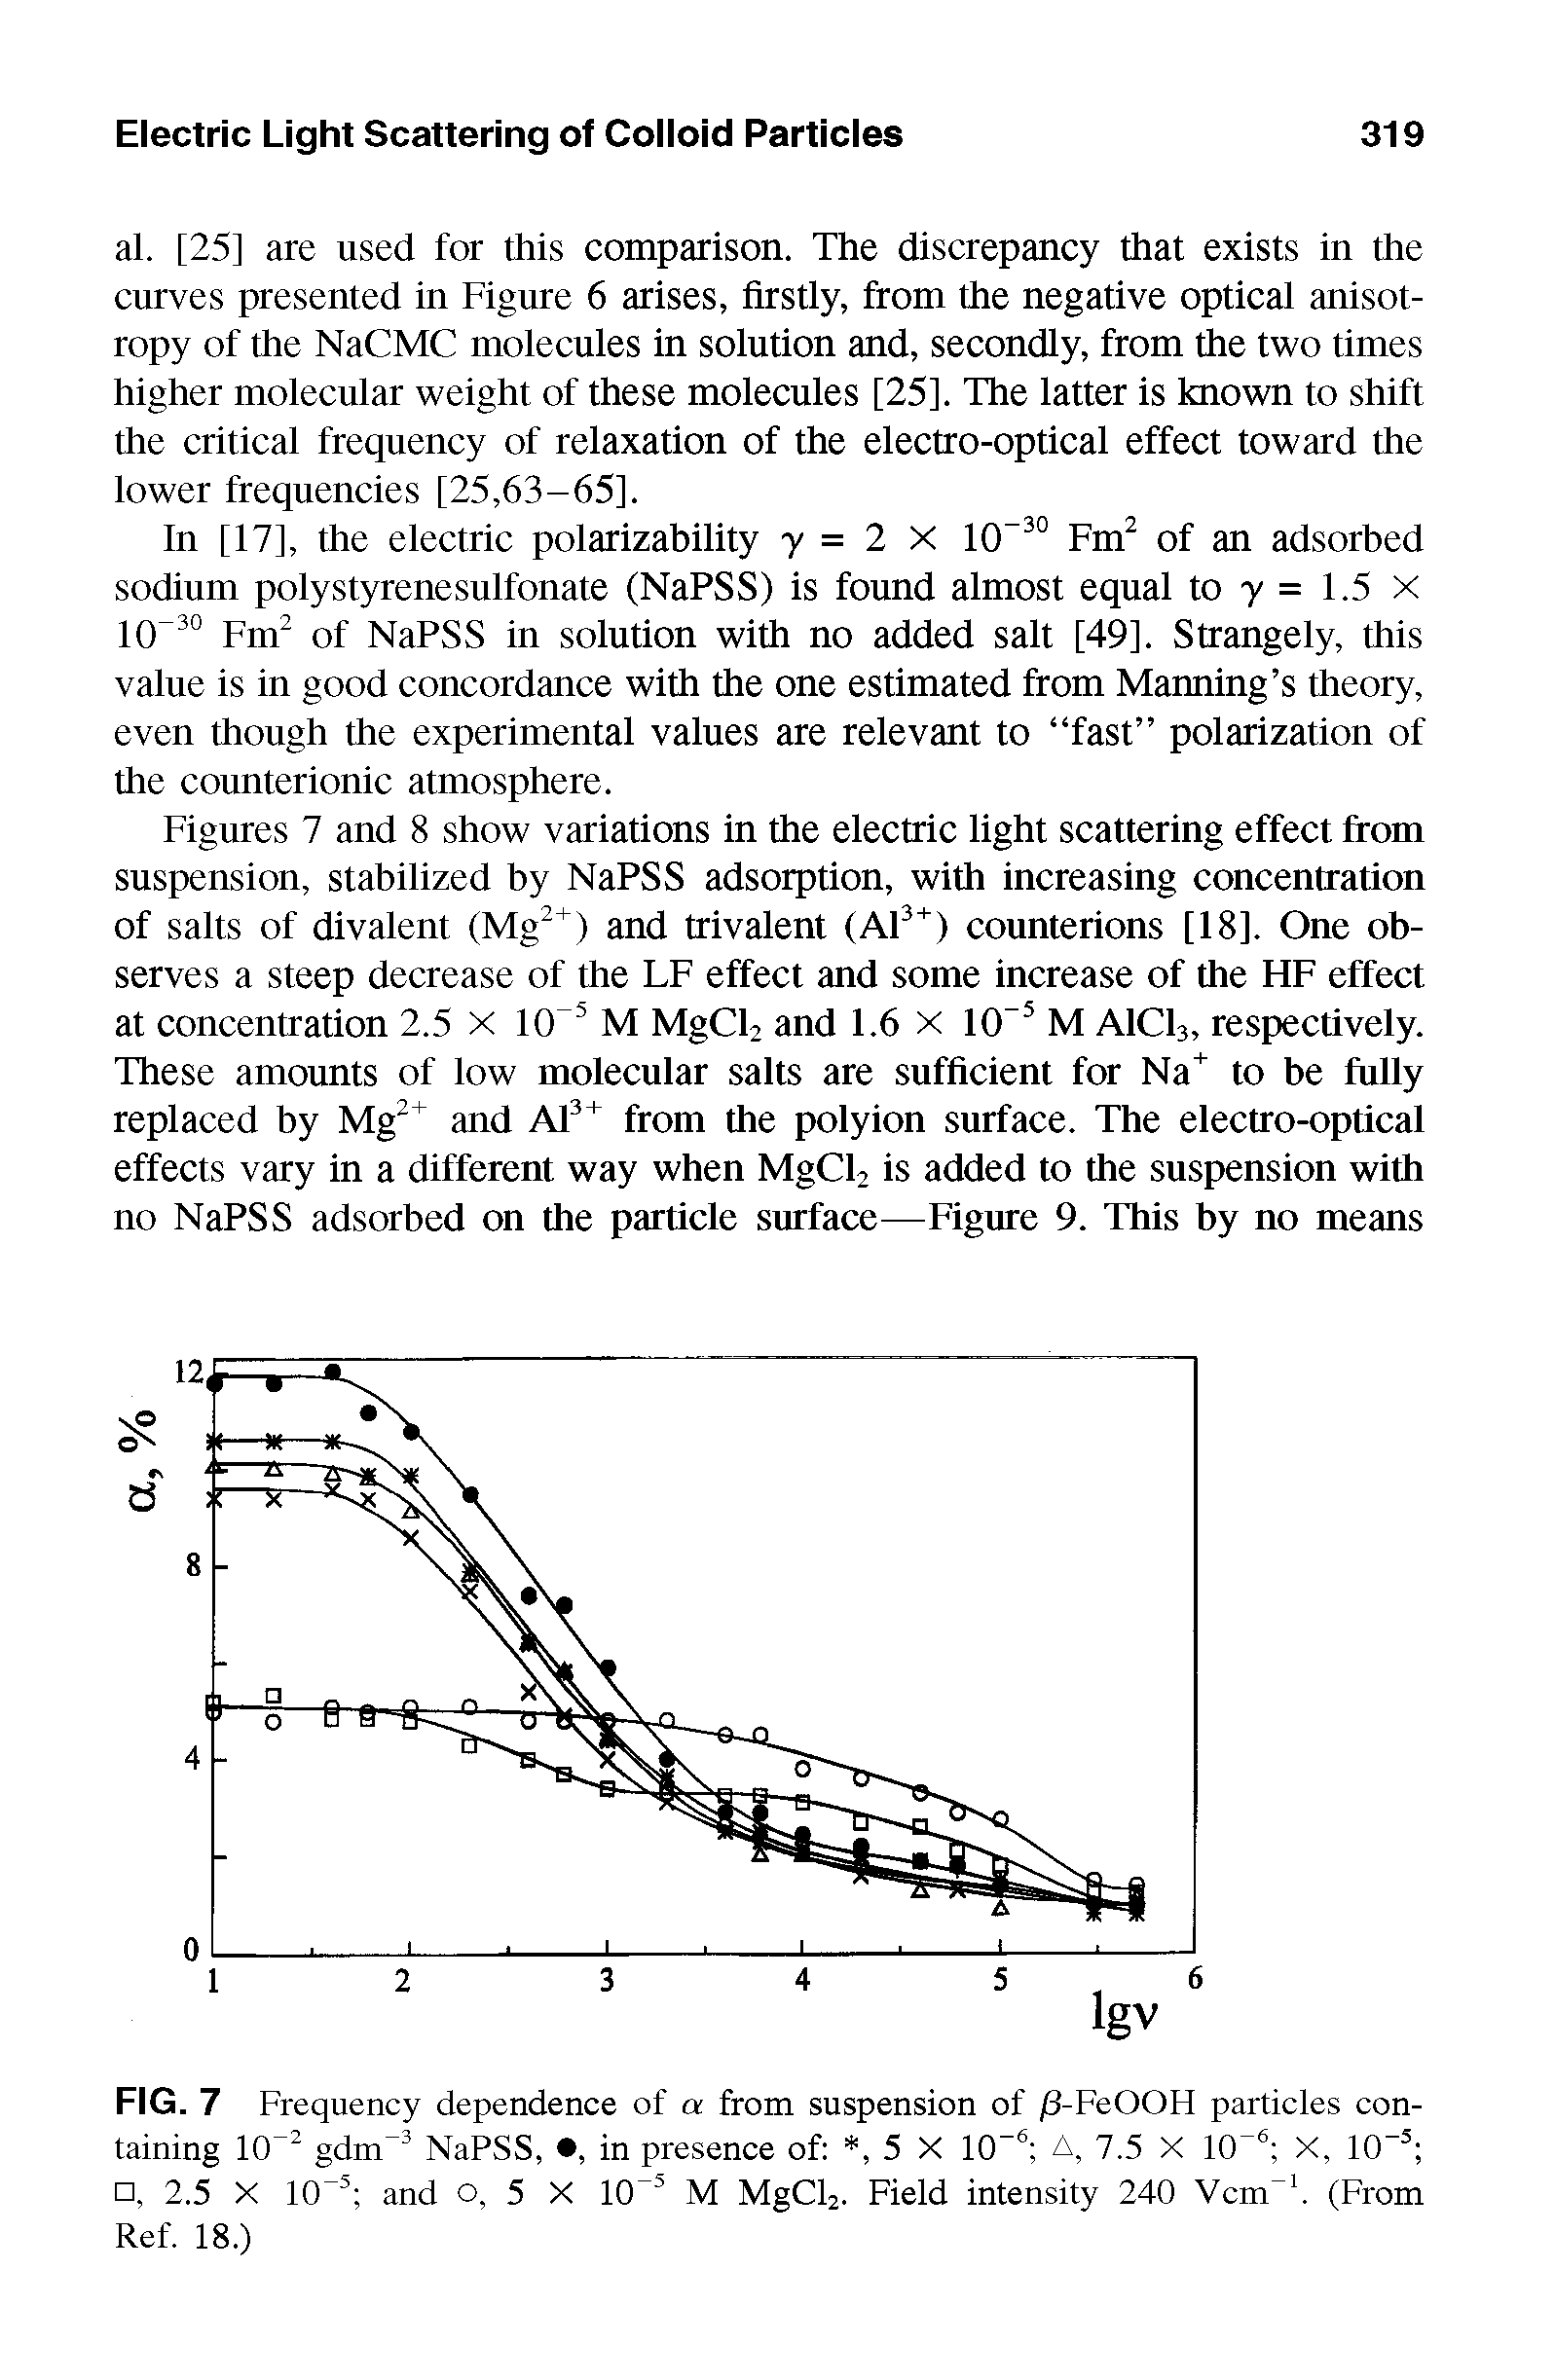 Figures 7 and 8 show variations in the electric light scattering effect from suspension, stabilized by NaPSS adsorption, with increasing concentration of salts of divalent (Mg2+) and trivalent (Al3+) counterions [18], One observes a steep decrease of the LF effect and some increase of the HF effect at concentration 2.5 X 10 M MgCl2 and 1.6 x 10 5 M A1C13, respectively. These amounts of low molecular salts are sufficient for Na+ to be fully replaced by Mg2+ and Al3+ from the polyion surface. The electro-optical effects vary in a different way when MgCl2 is added to the suspension with no NaPSS adsorbed on the particle surface—Figure 9. This by no means...